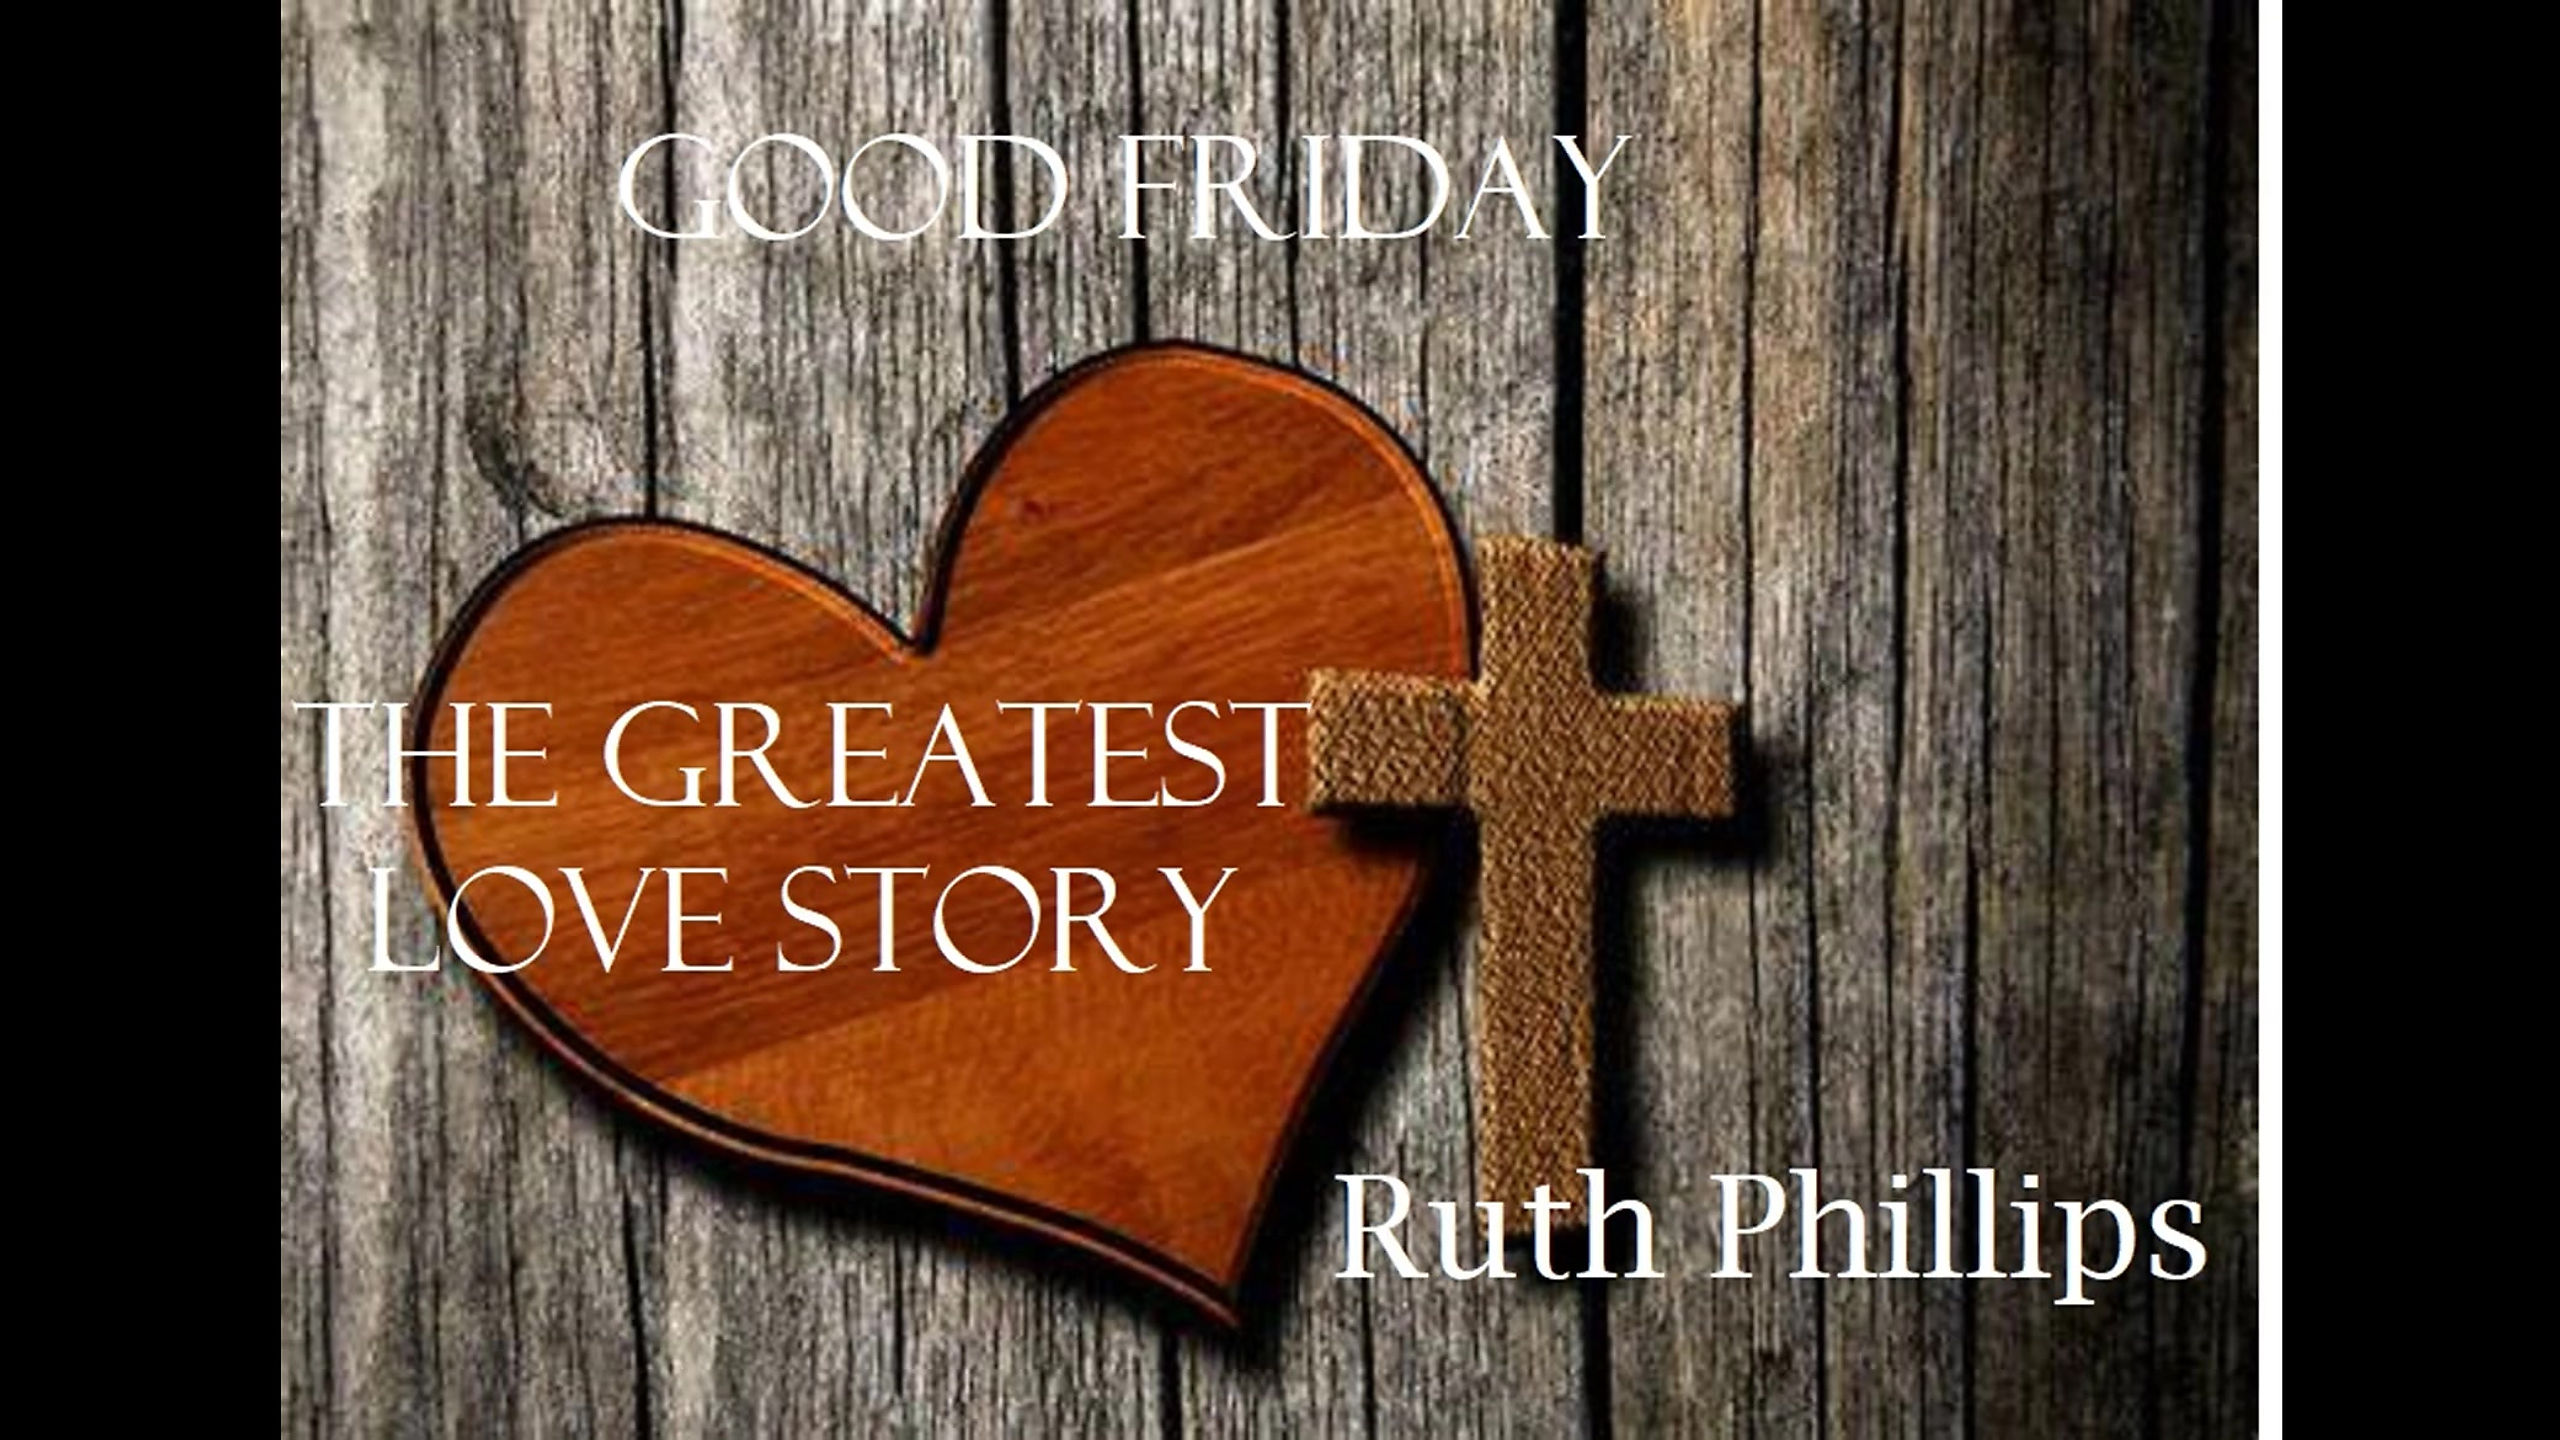 Good Friday: The Greatest Love Story